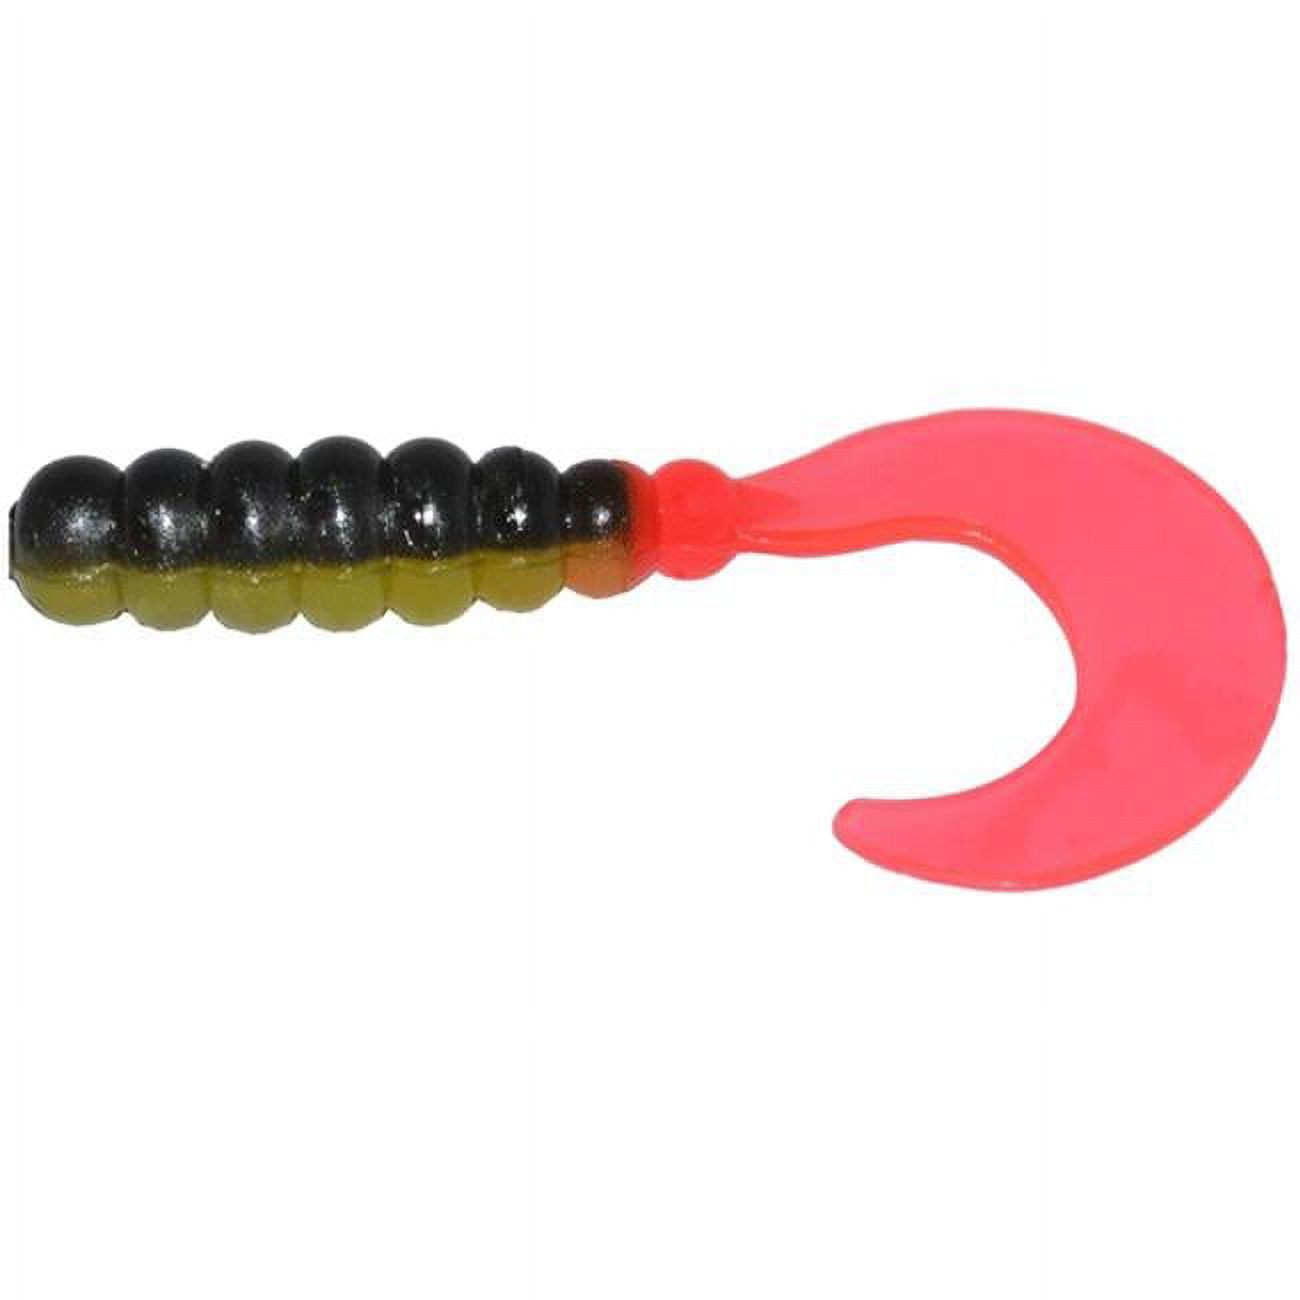 Big Bite Baits FG221 2 in. Fat Grub, Bumble Bee - Pack of 10